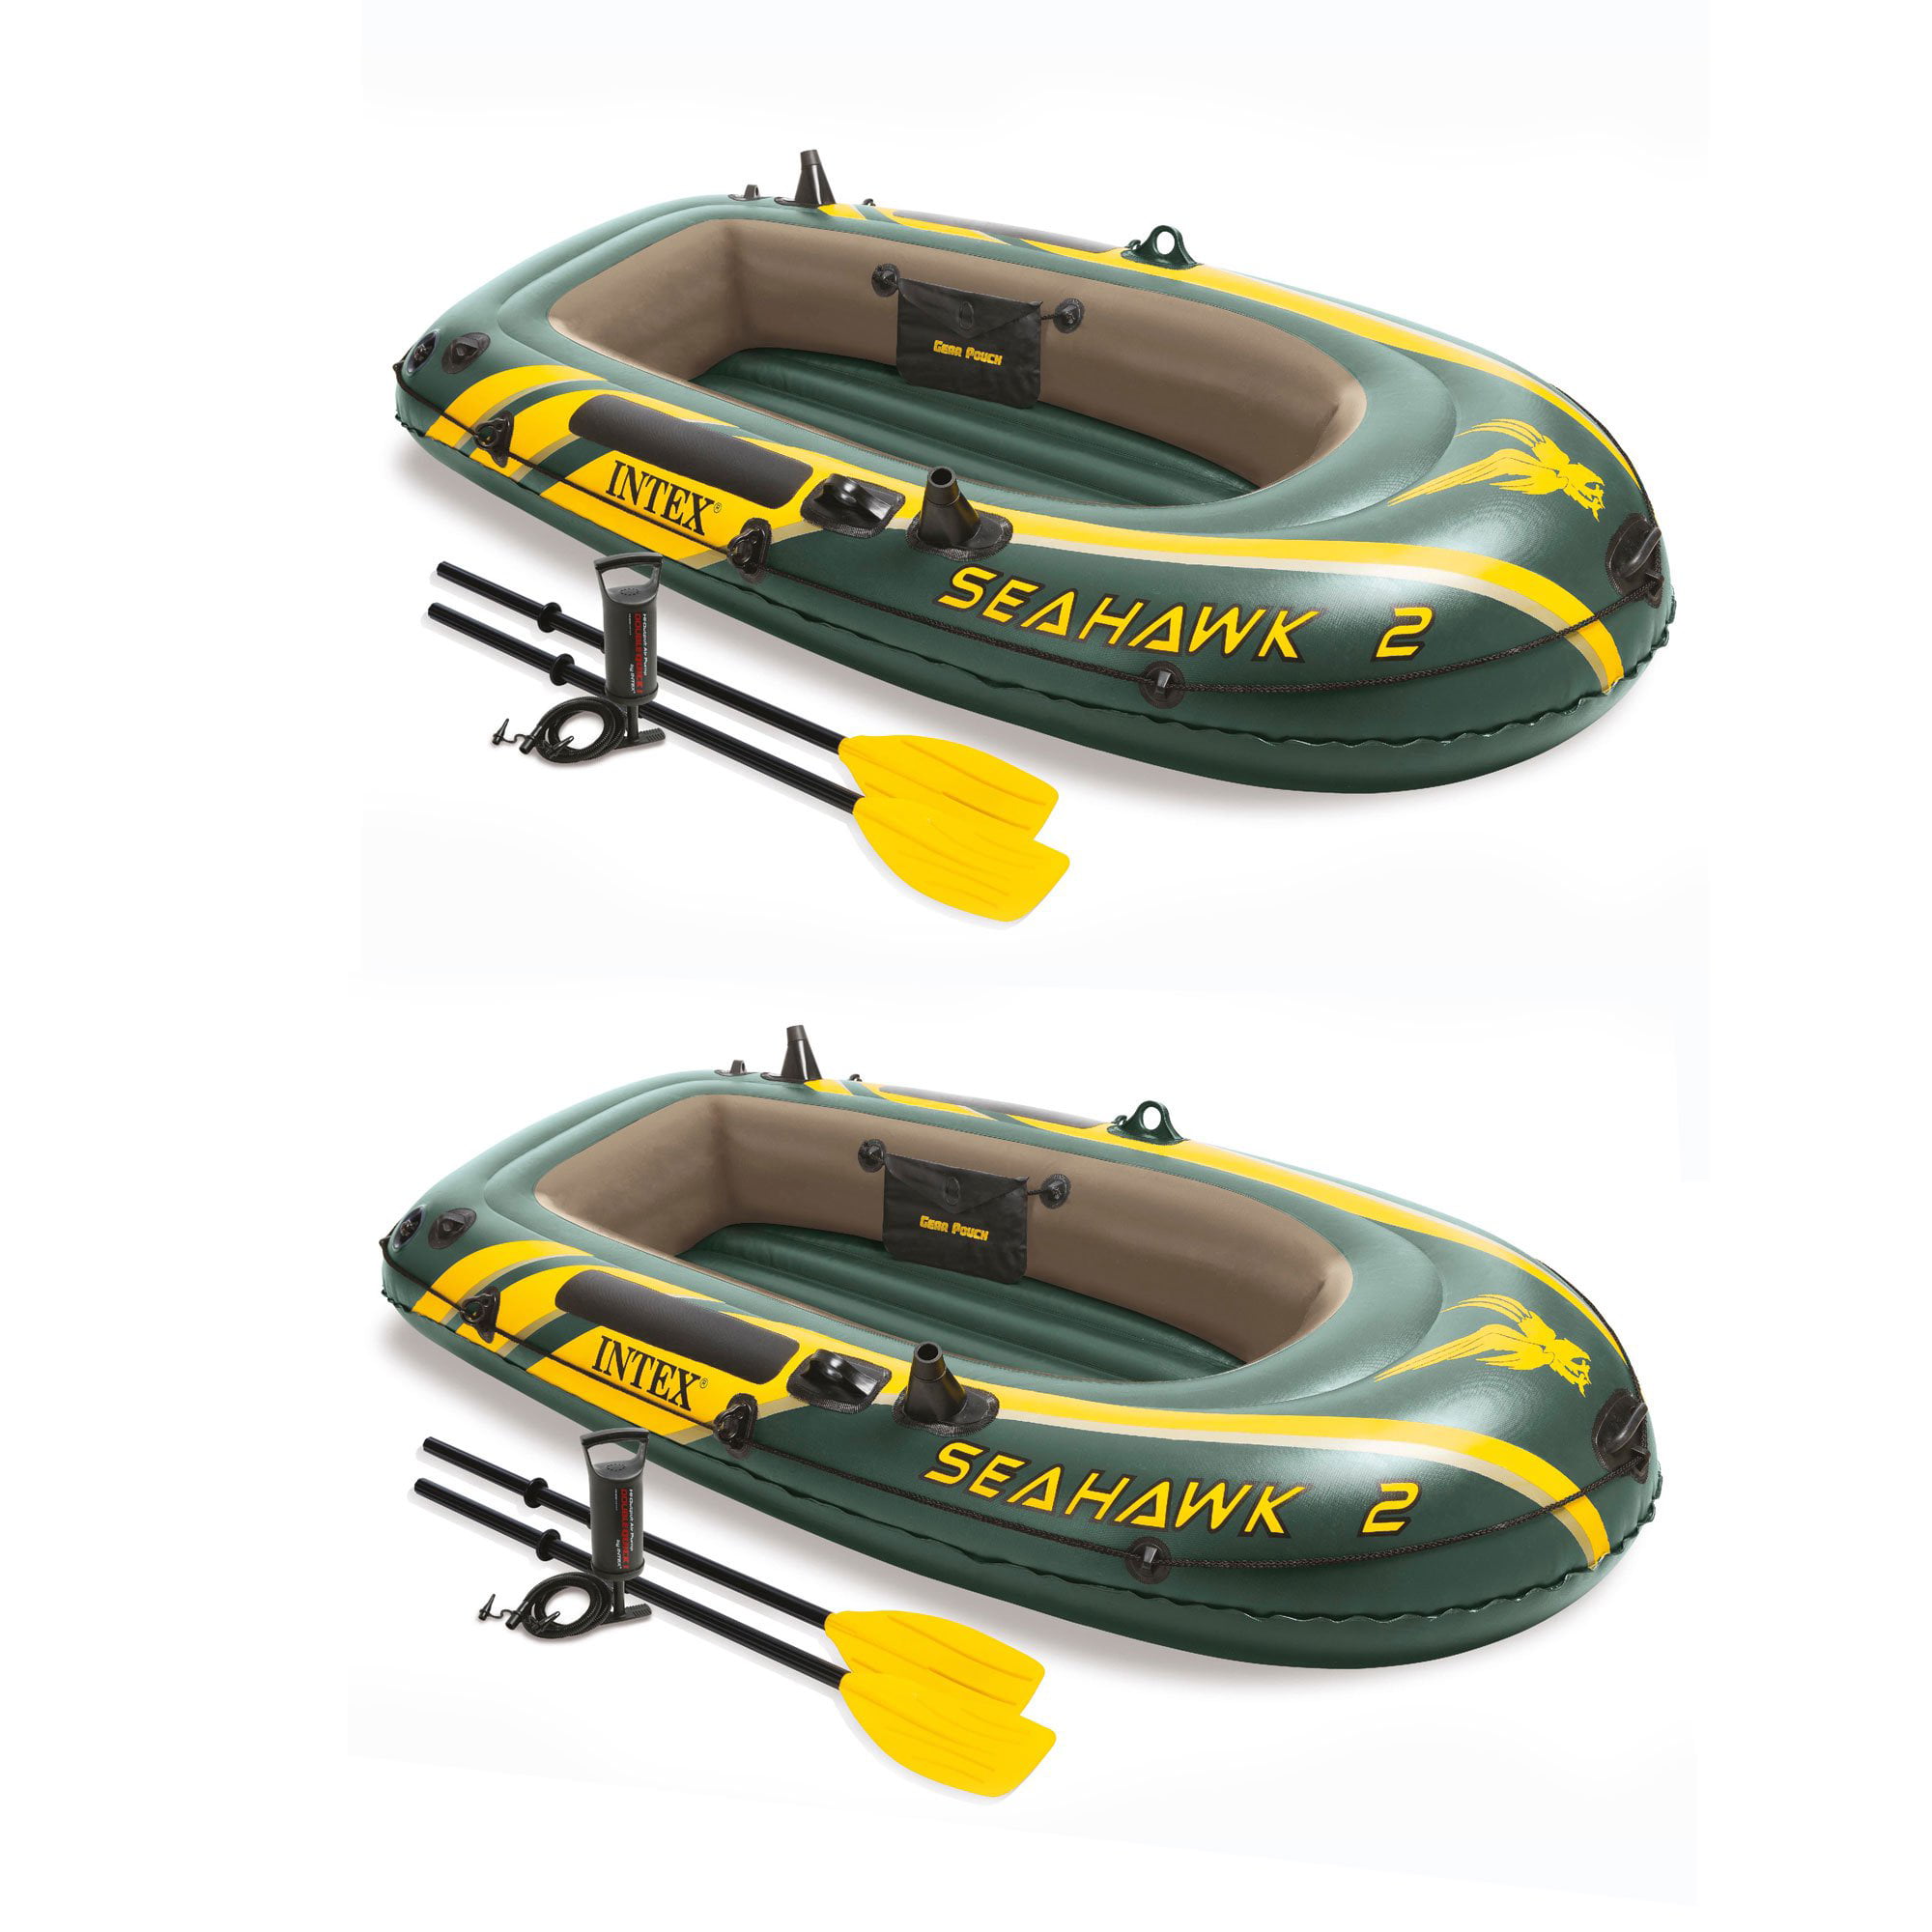 Intex Seahawk 2 Inflatable Boat Dinghy Set With Oars and Pump 2 Person 